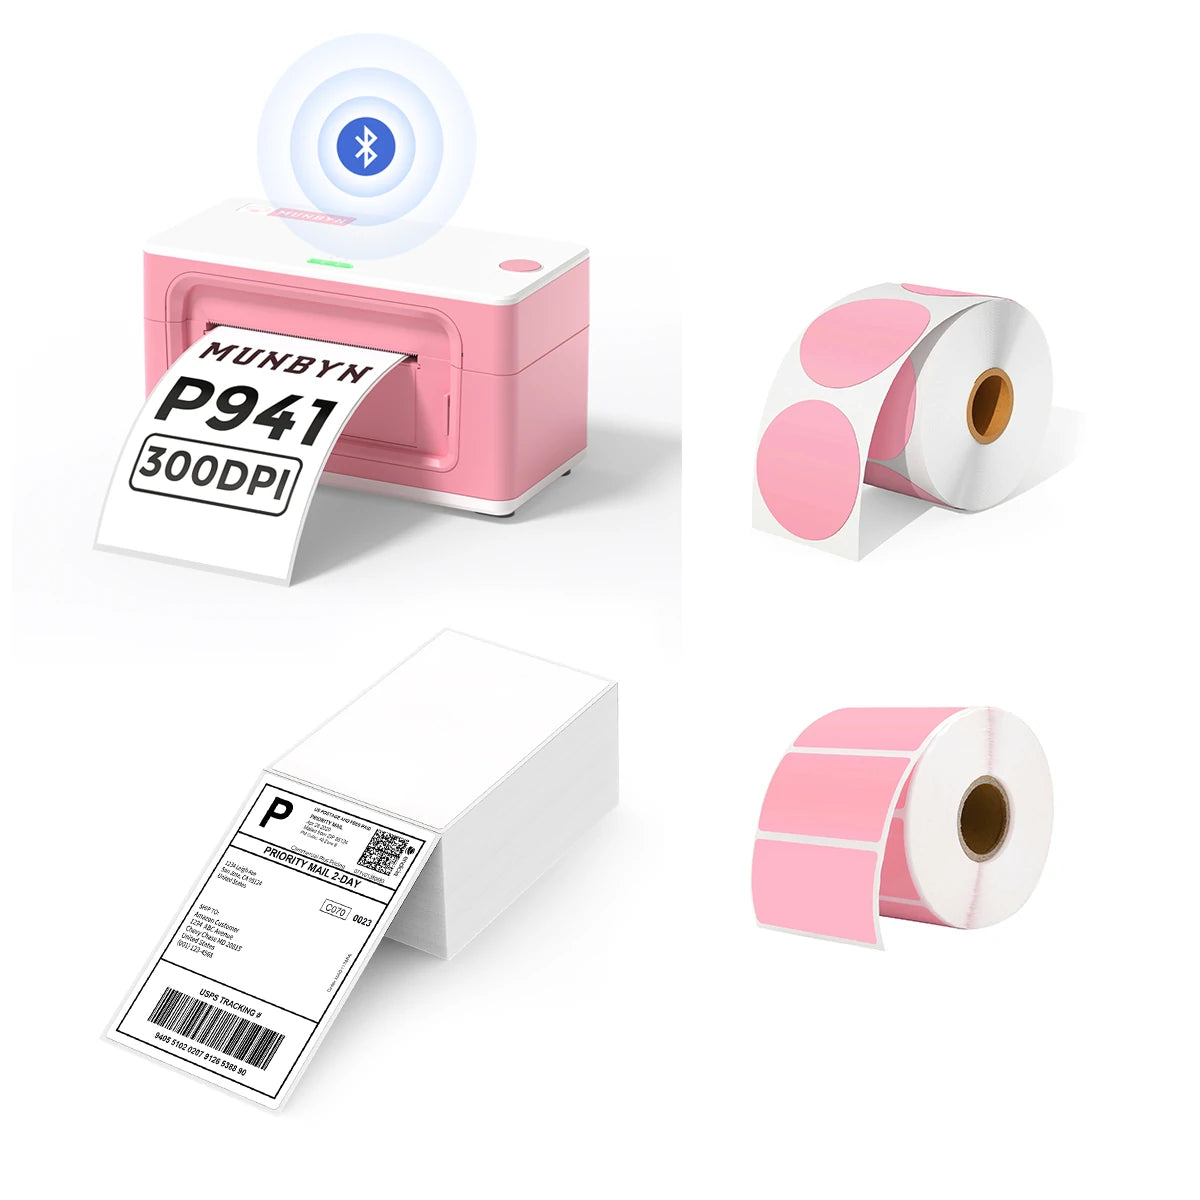 MUNBYN P941B pink Bluetooth Thermal Label Printer Kit includes a pink Bluetooth label printer, two rolls of pink labels, and a stack of shipping labels.